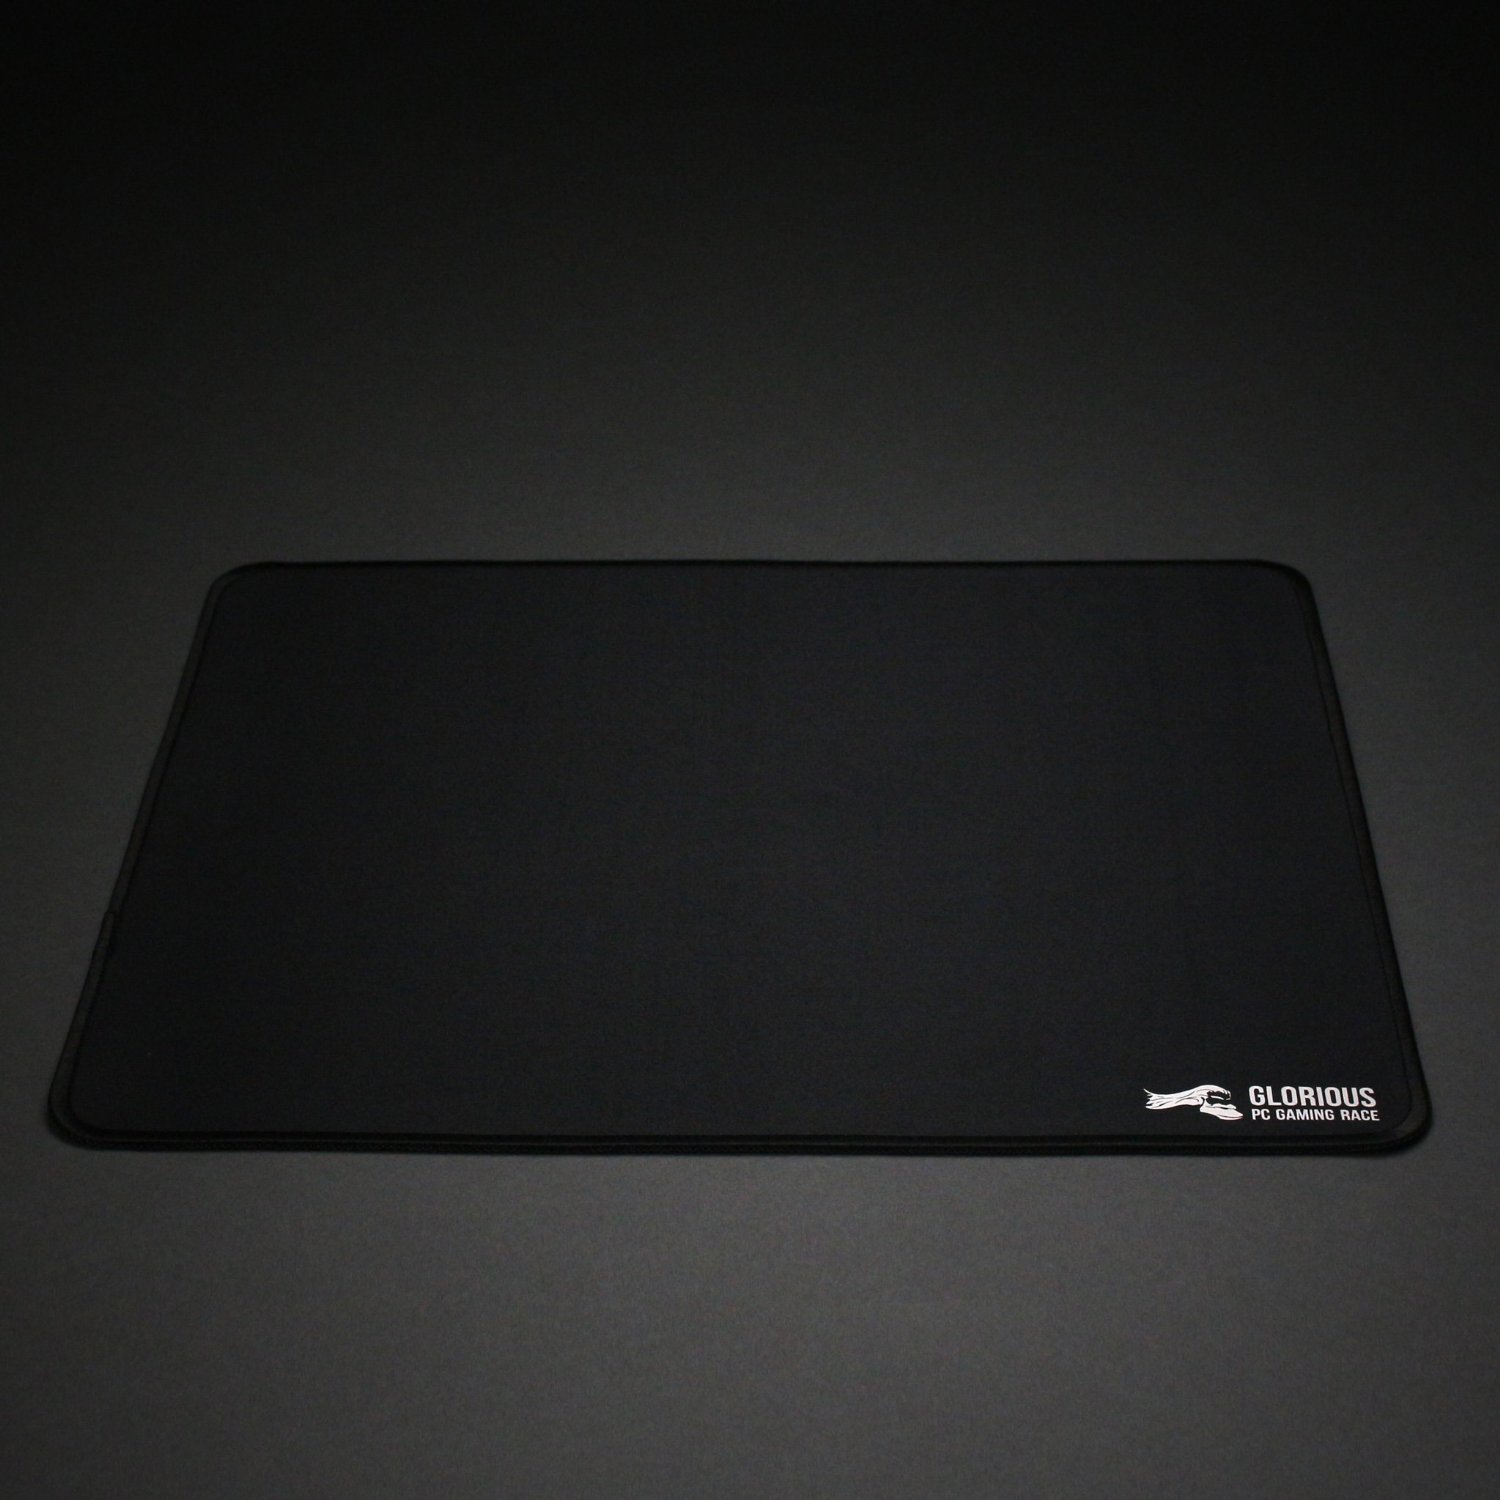 Glorious - Glorious G-XL Extra Large Pro Gaming Surface - Black 475x406x2mm